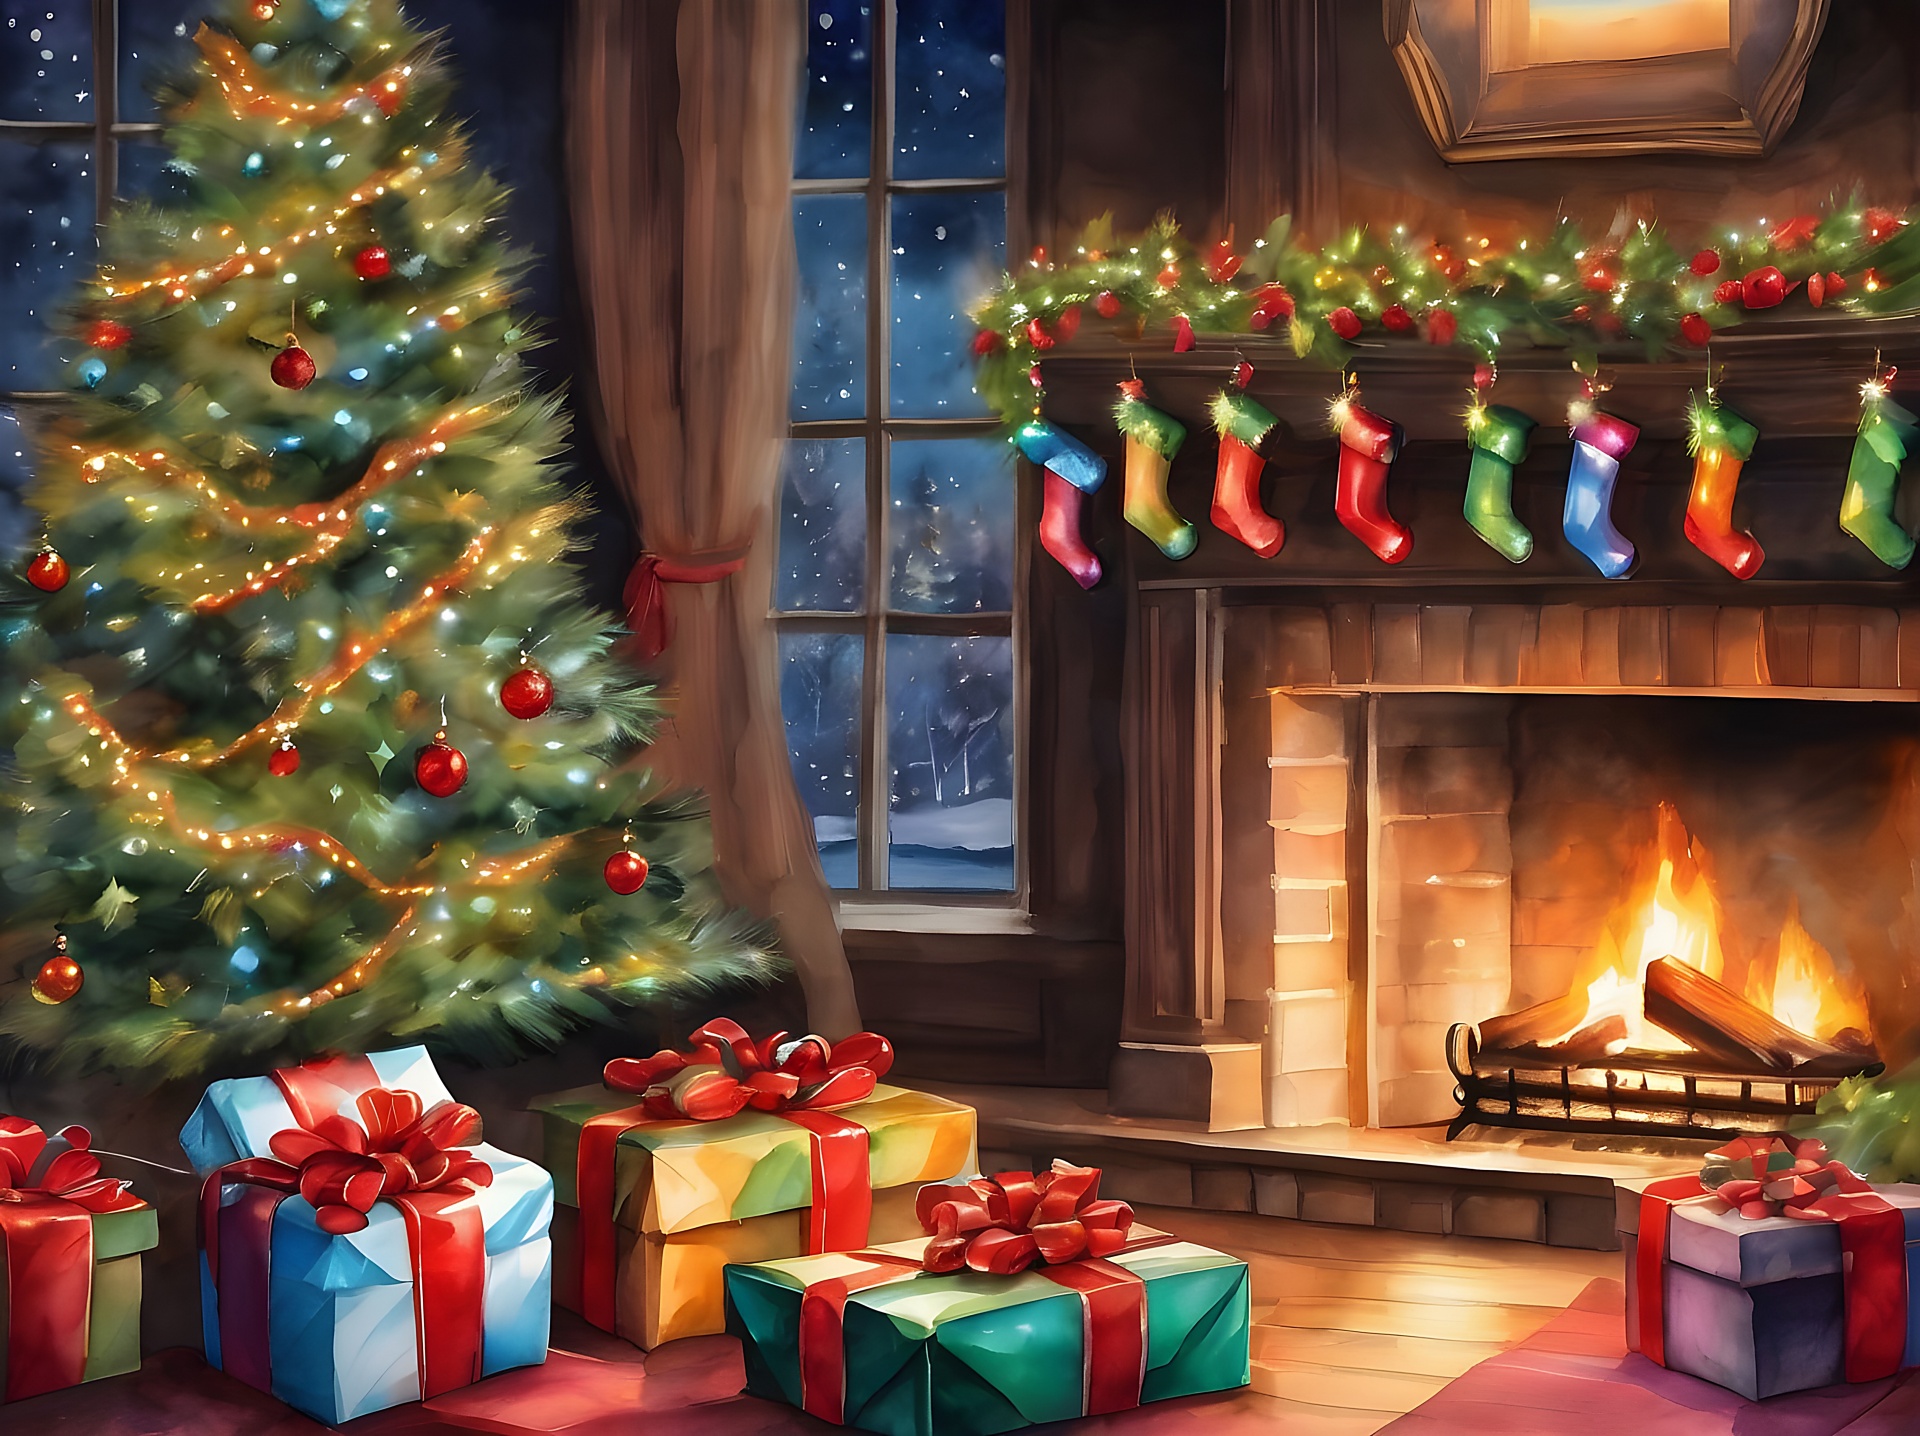 Christmas Gifts Fireplace Free Stock Photo - Public Domain Pictures